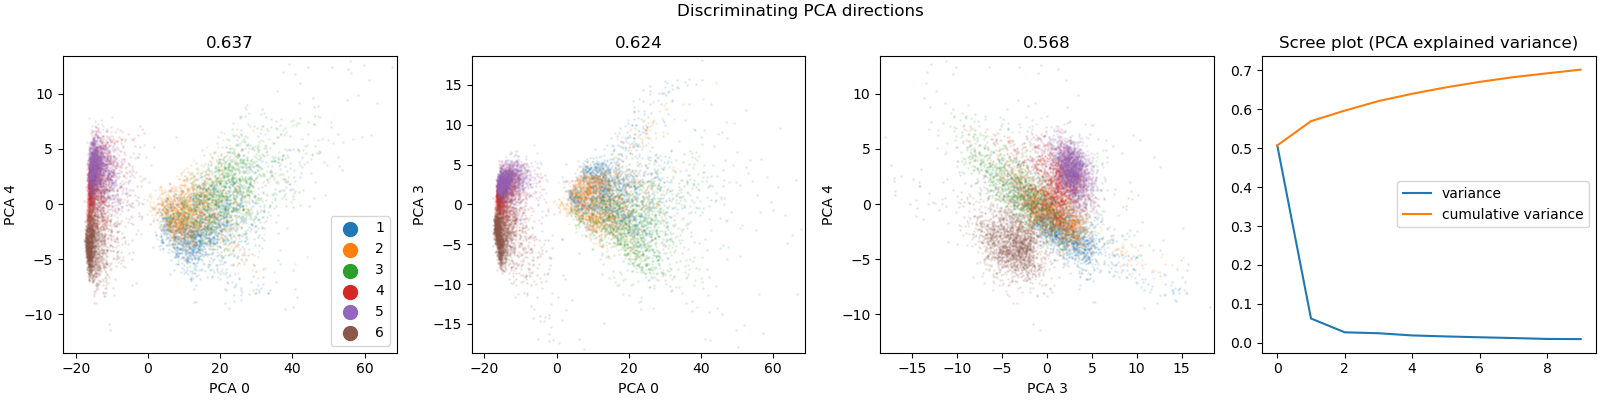 Discriminating PCA directions, 0.637, 0.624, 0.568, Scree plot (PCA explained variance)